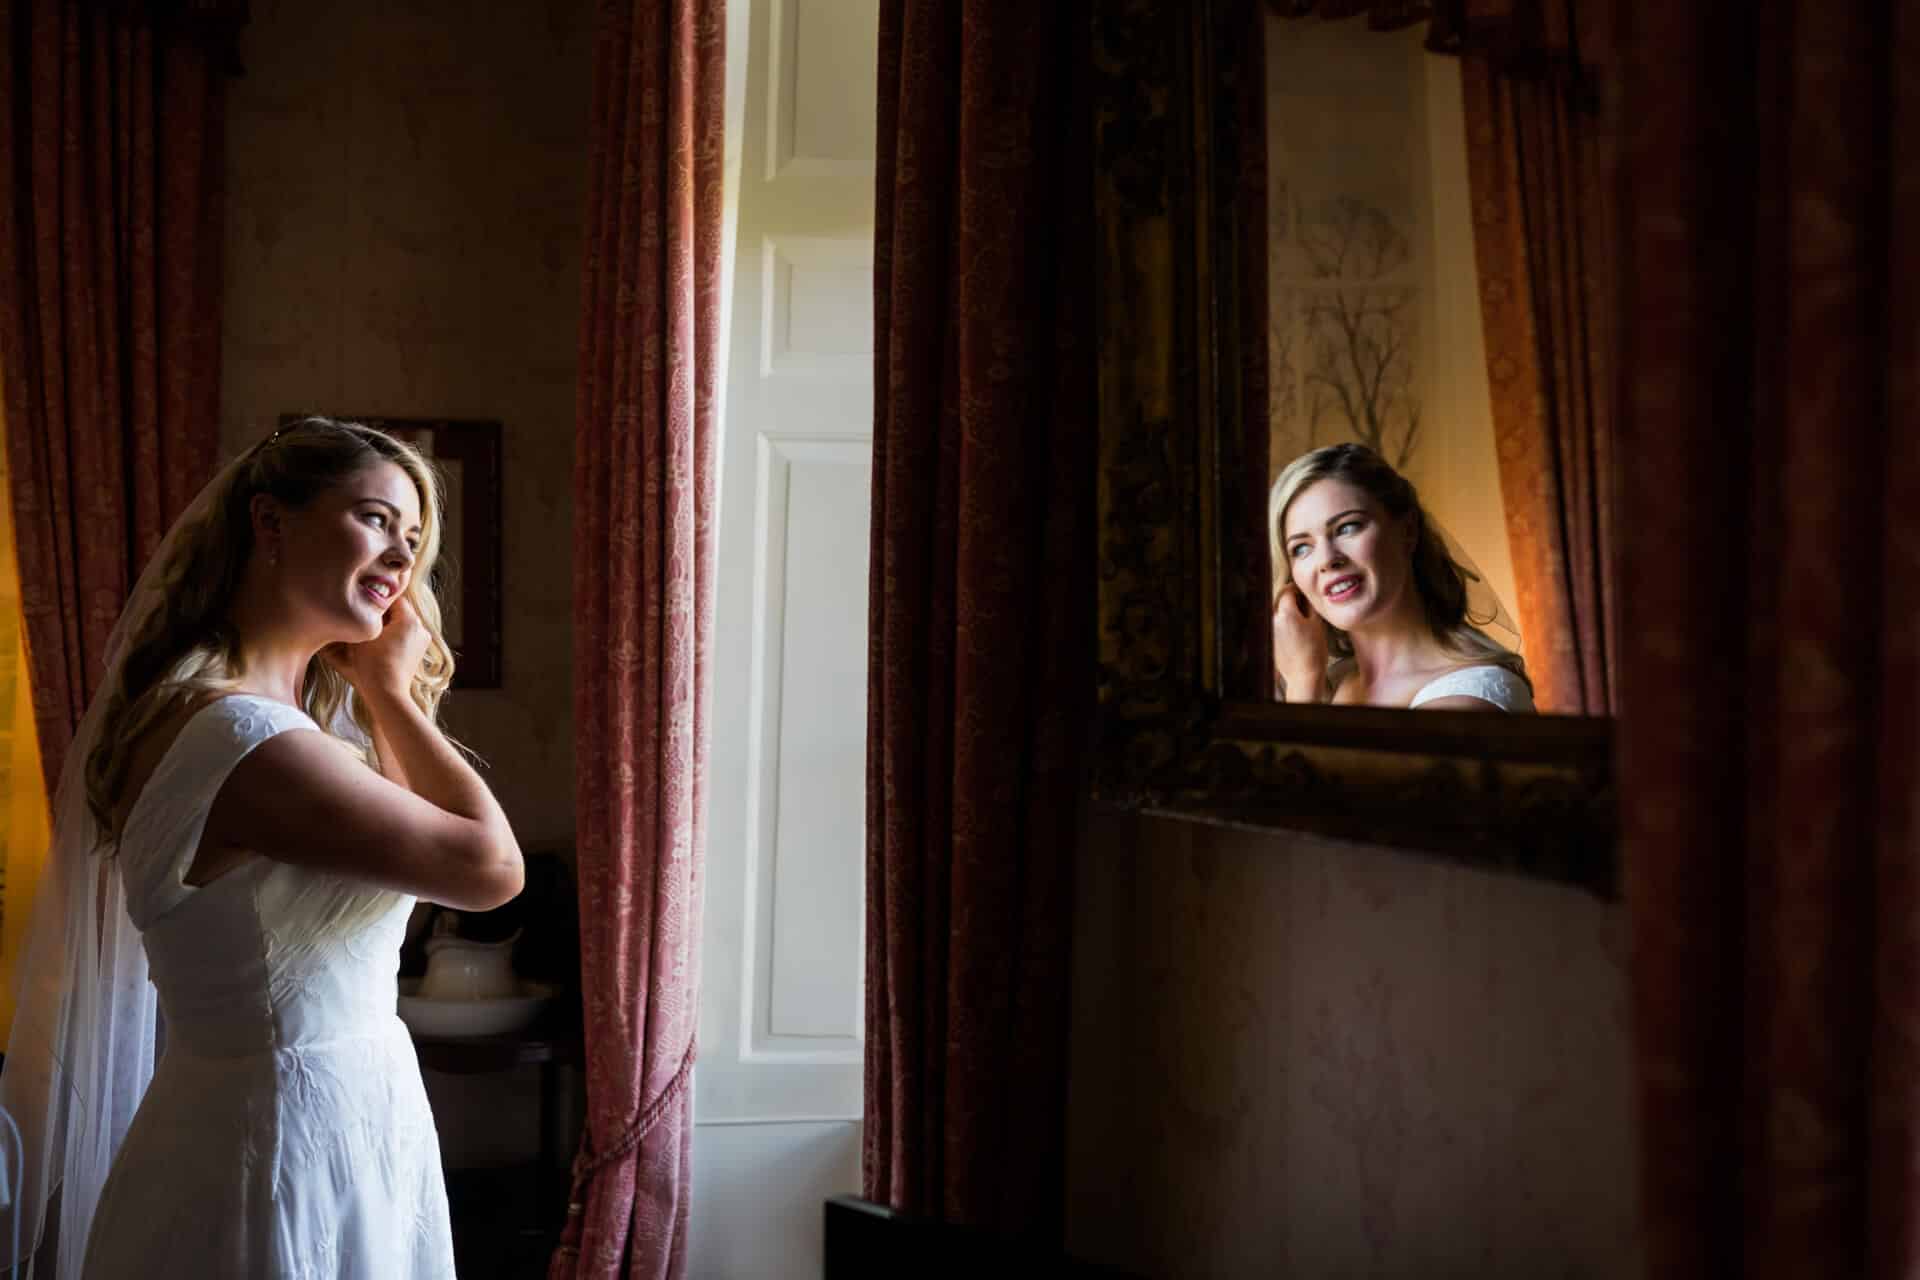 brides reflection in a mirror as she puts her earrings in